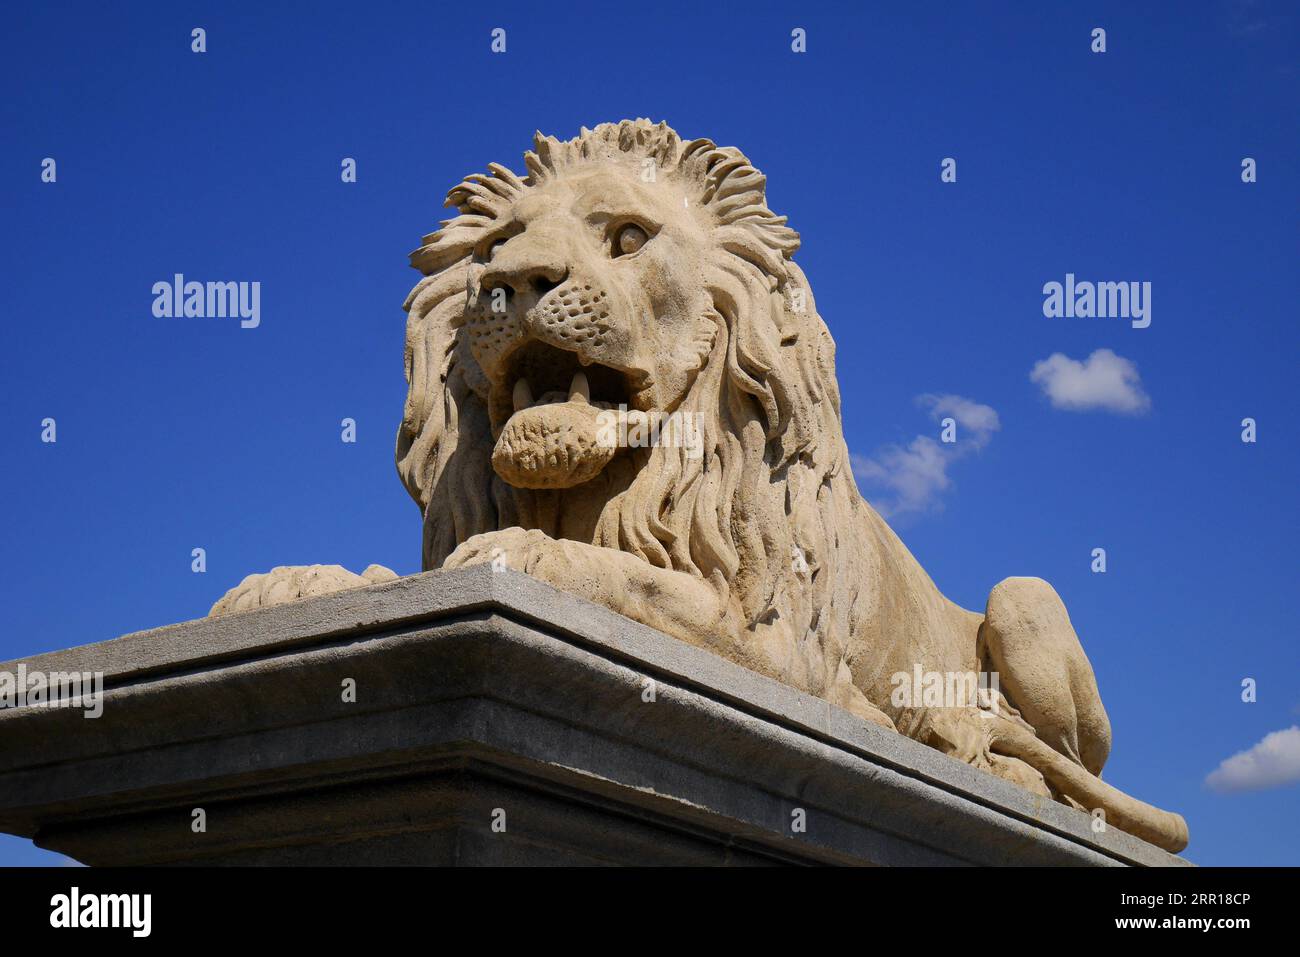 Statue of a lion on the Buda side of the Chain Bridge, crossing the River Danube, Budapest, Hungary Stock Photo